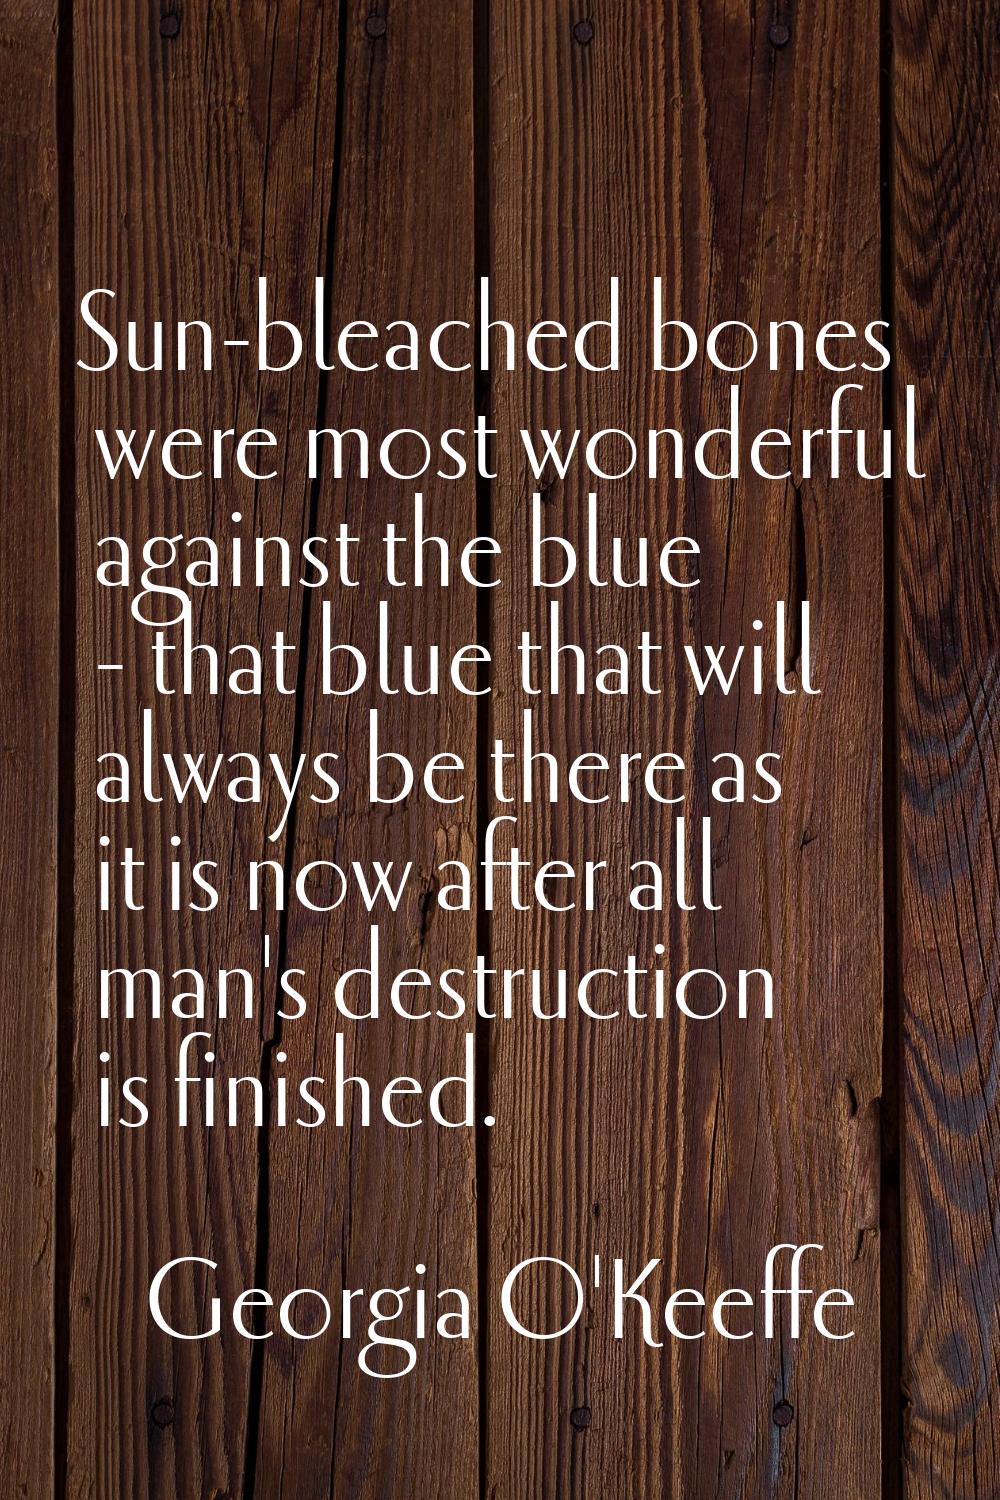 Sun-bleached bones were most wonderful against the blue - that blue that will always be there as it